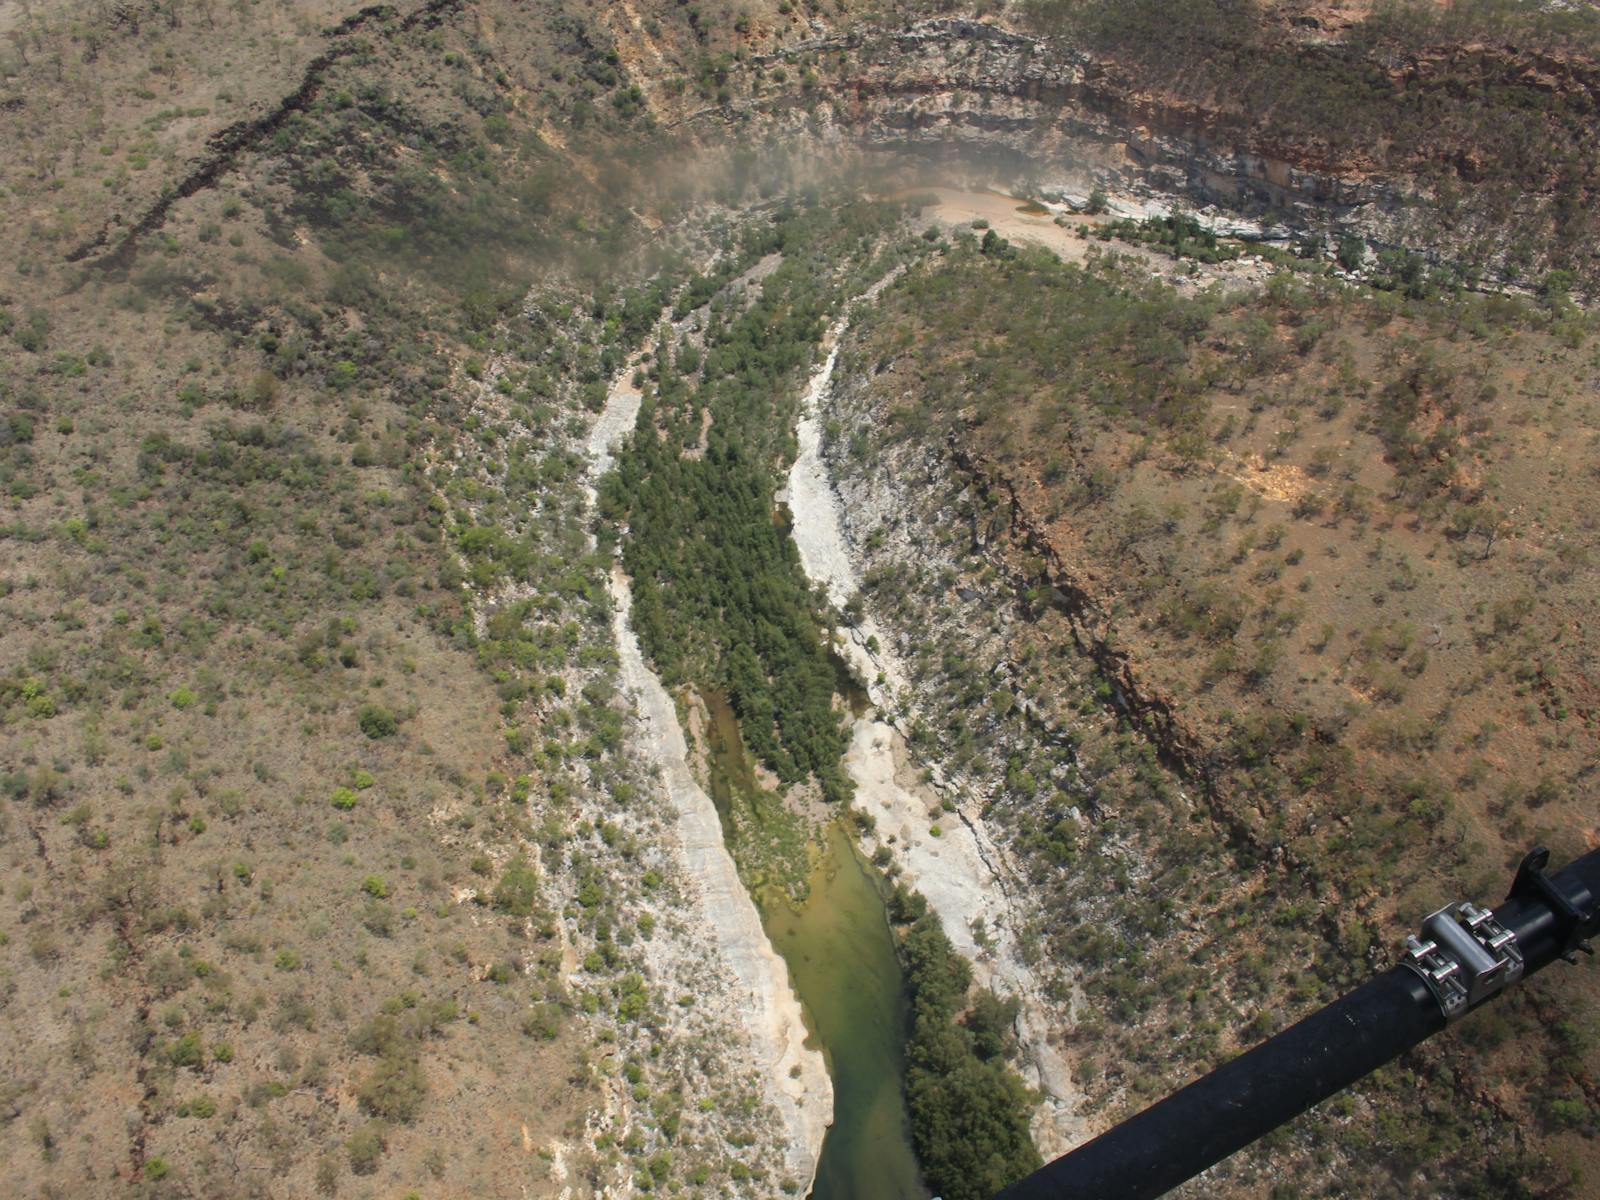 Looking down from the helicopter into Porcupine Gorge NP